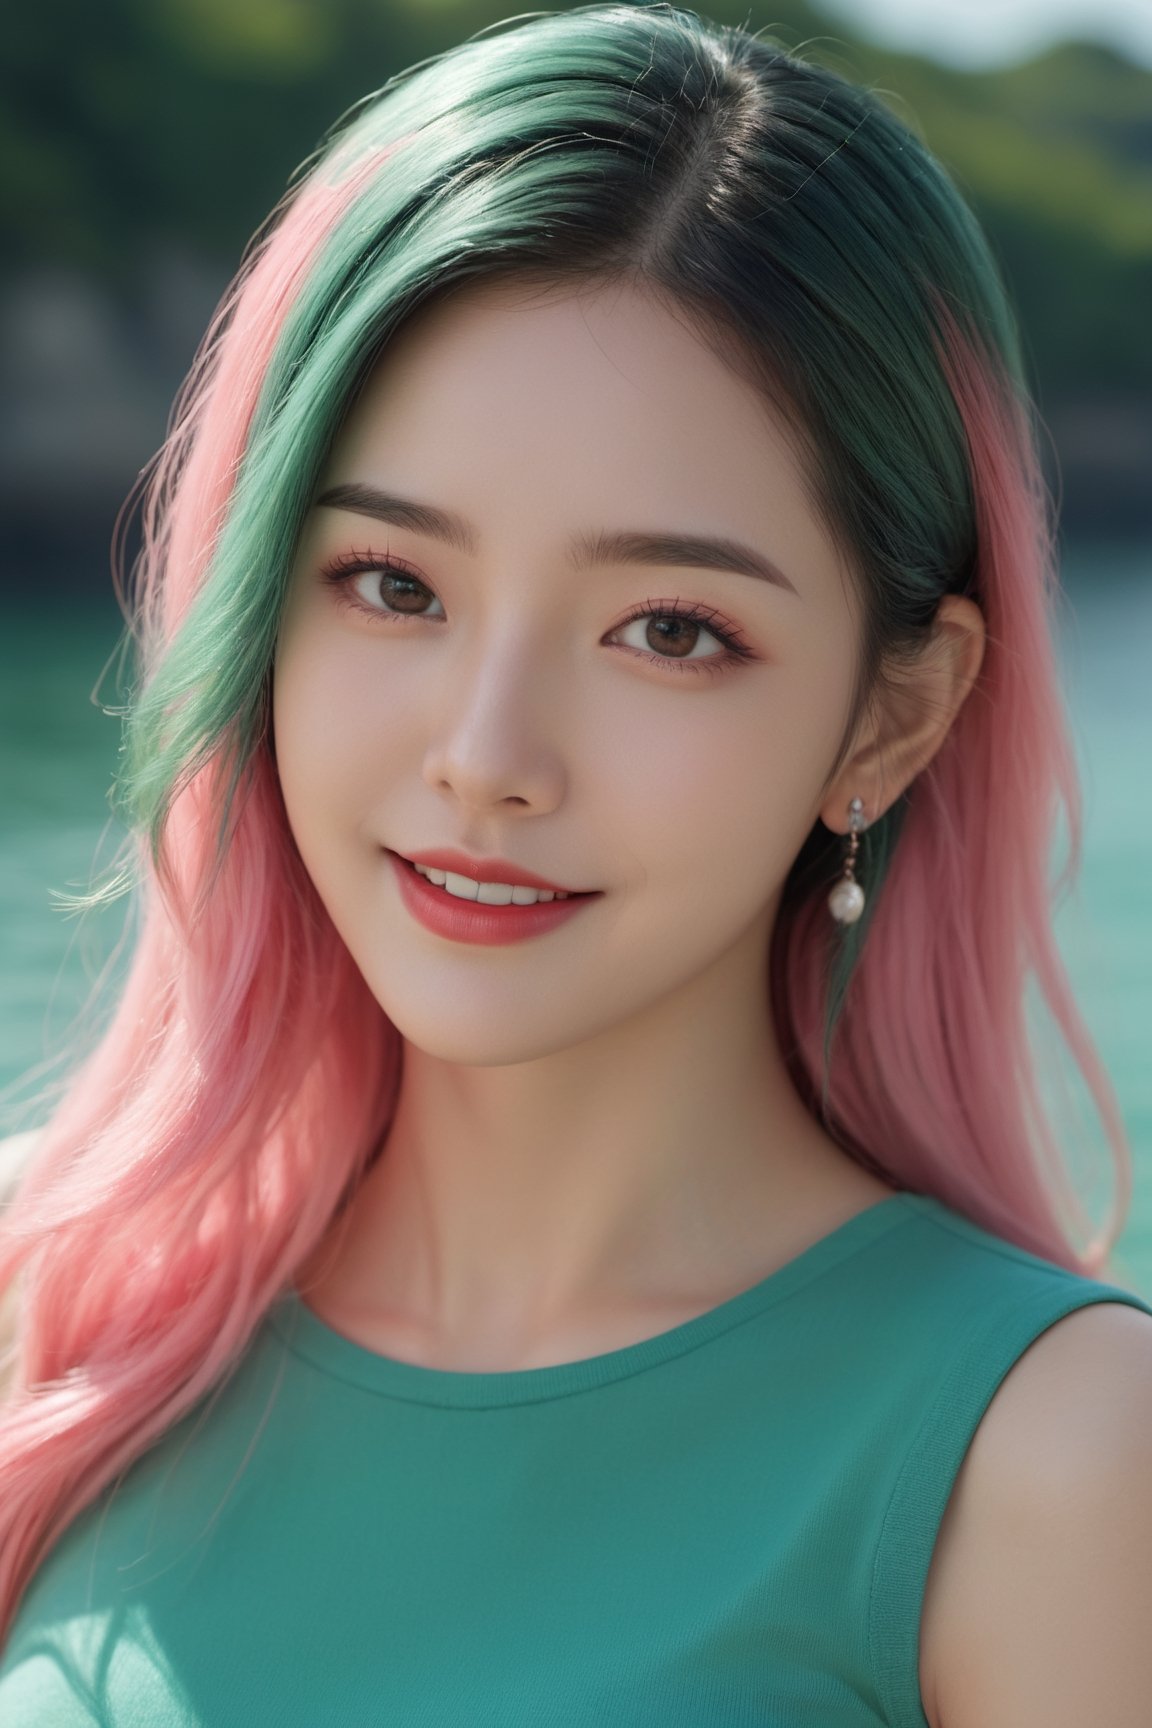 Best Quality,Masterpiece,Ultra High Resolution,(Realisticity:1.4),photorealistic,extreme detailed,Original Photo,1girl,portrait,(fullbody),long hair,pink & green hair,solo,(dynamic posture:1.4),mini_skirt,crop top,(dark sea green tone:1.2),looking at the audiences,red lips,smile,50mm,F0.8,8K raw,depth of field,